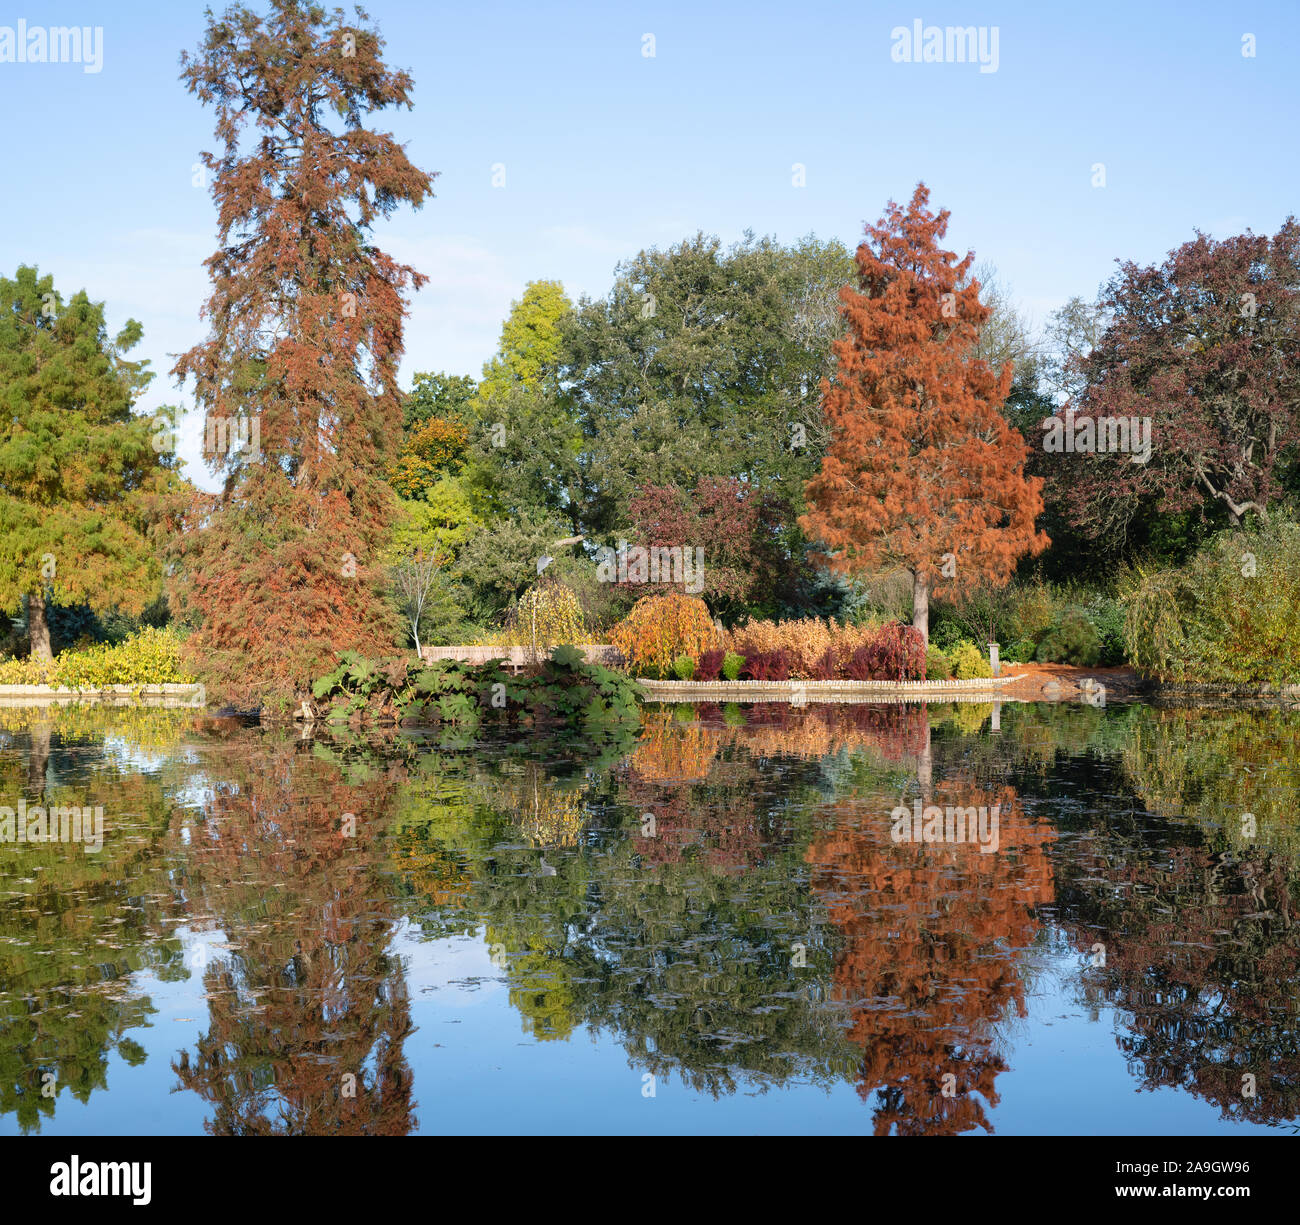 Taxodium distichum. Bald Cypress tree changing colour in autumn at RHS Wisley Gardens, Surrey, UK Stock Photo